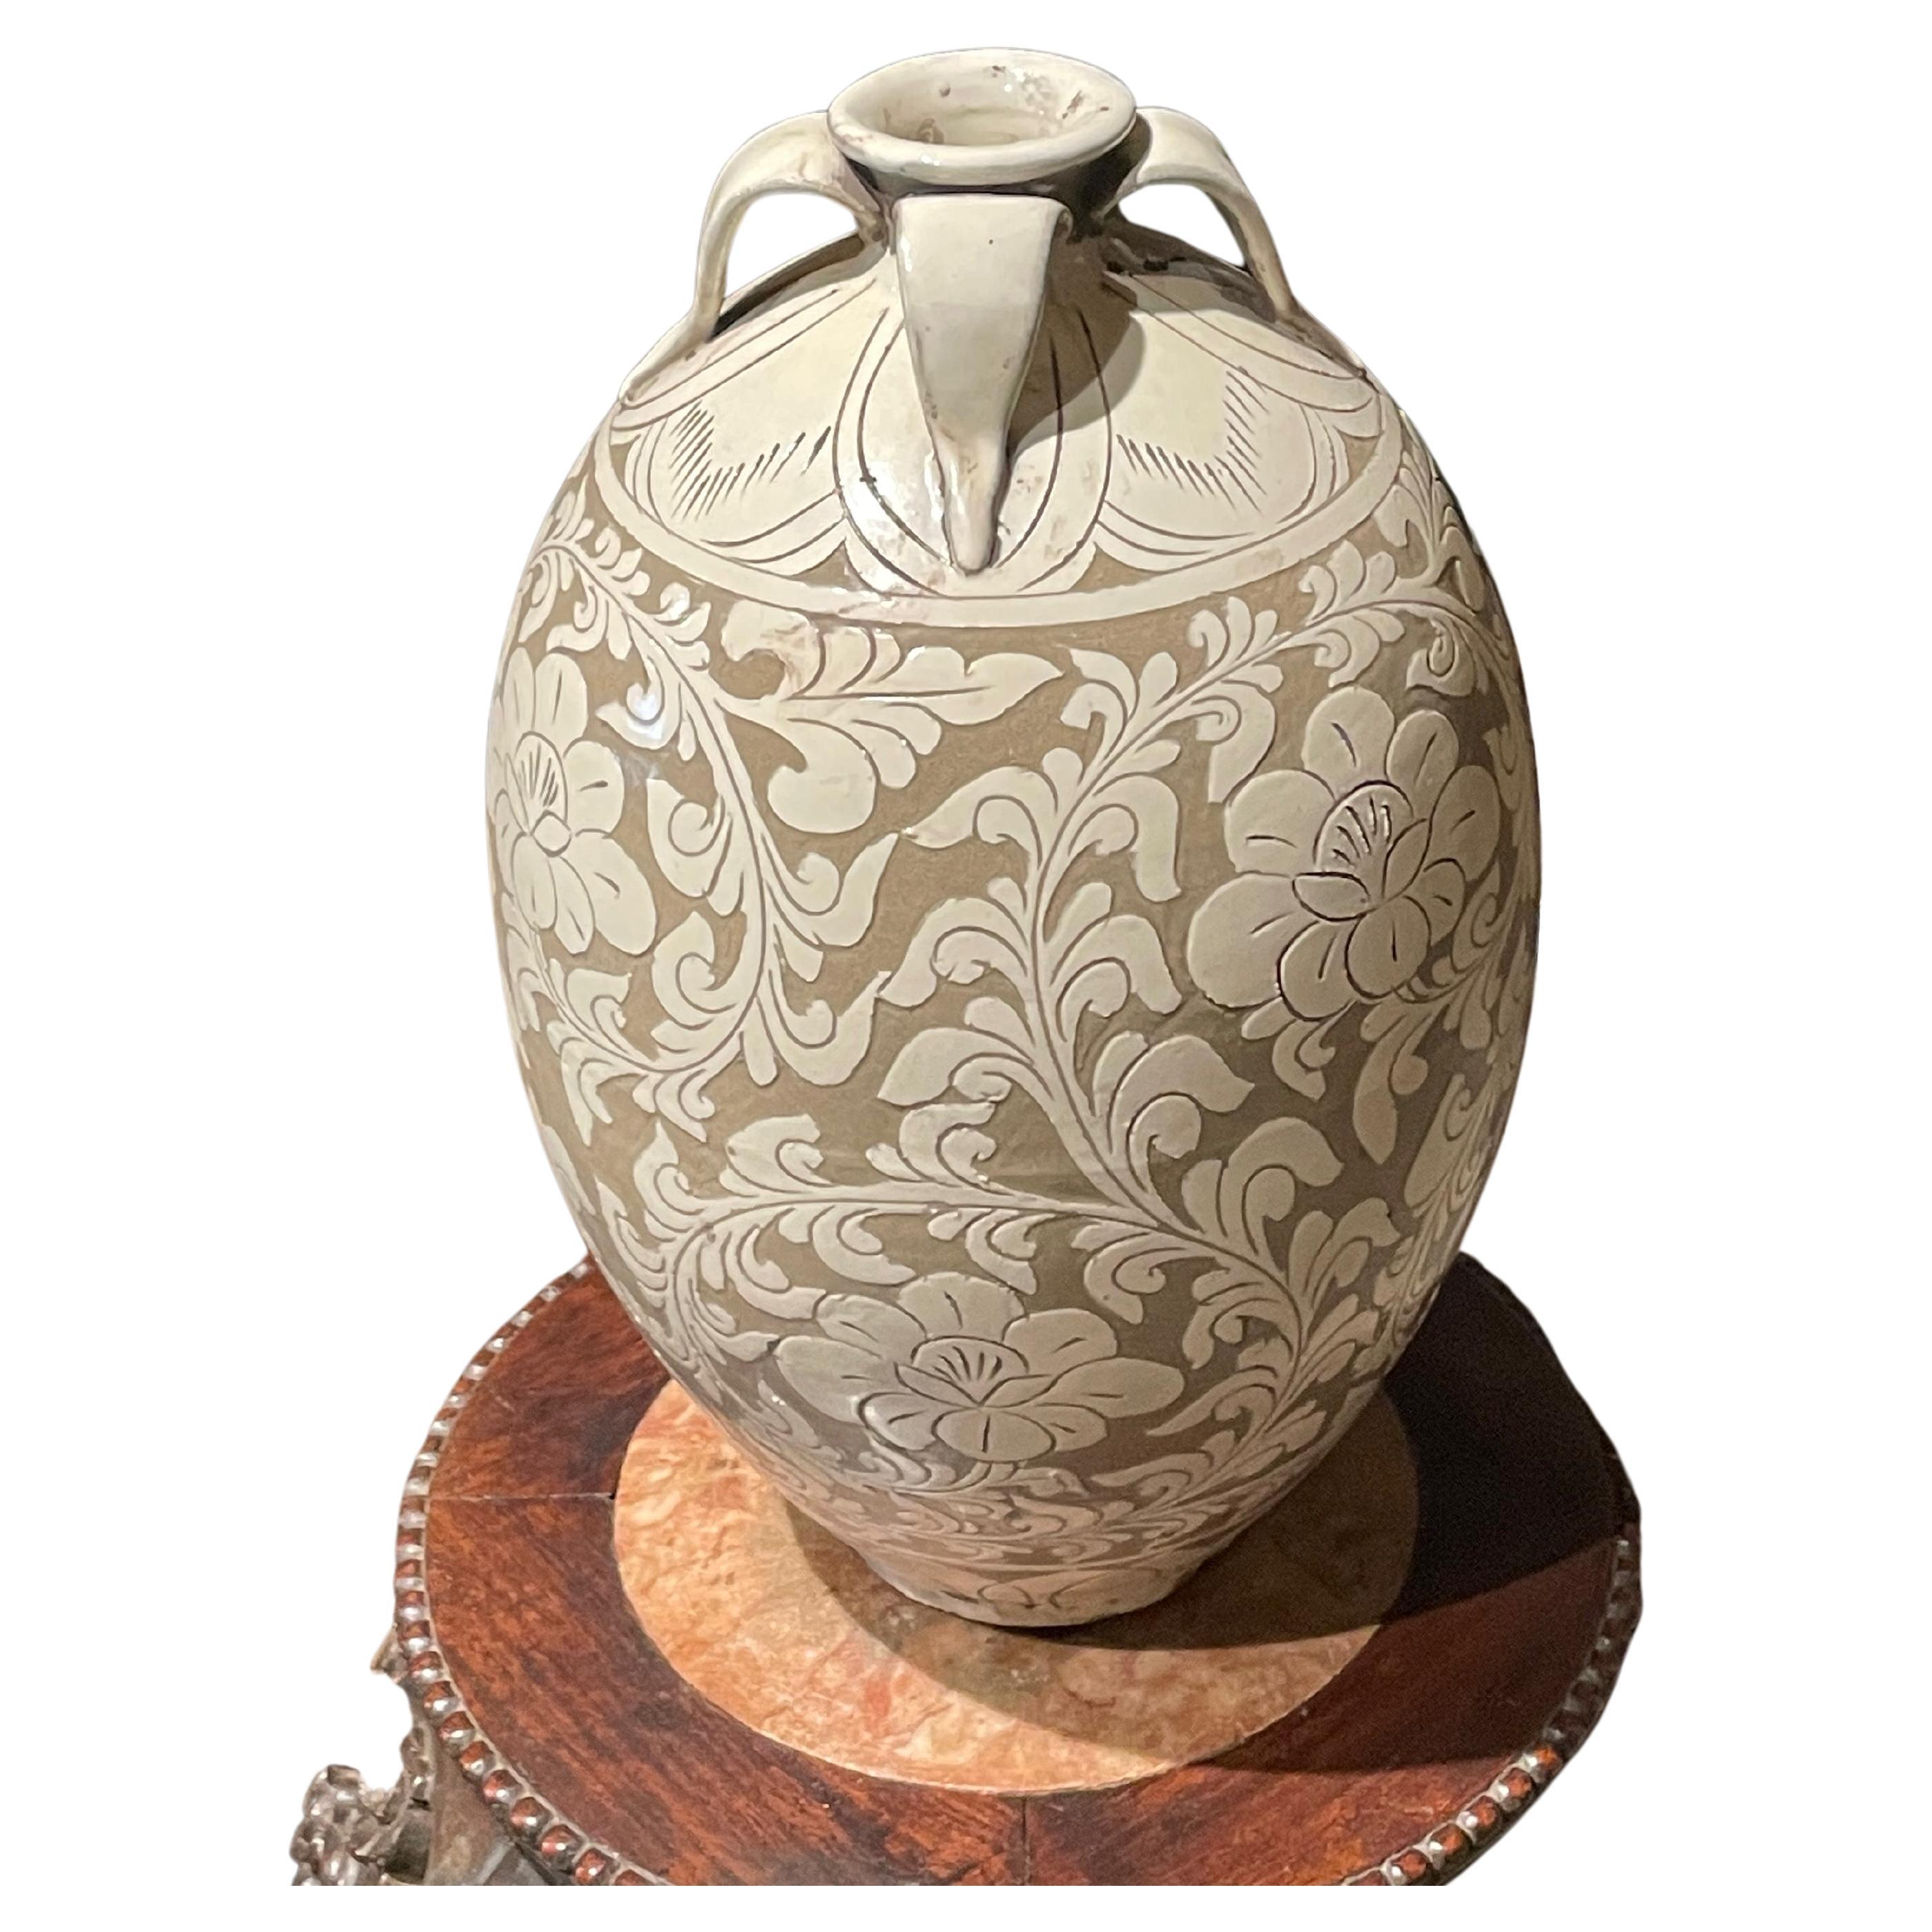 Contemporary Chinese tan ground with cream floral pattern overlay.
Four small handles at opening.
Two available and sold individually.